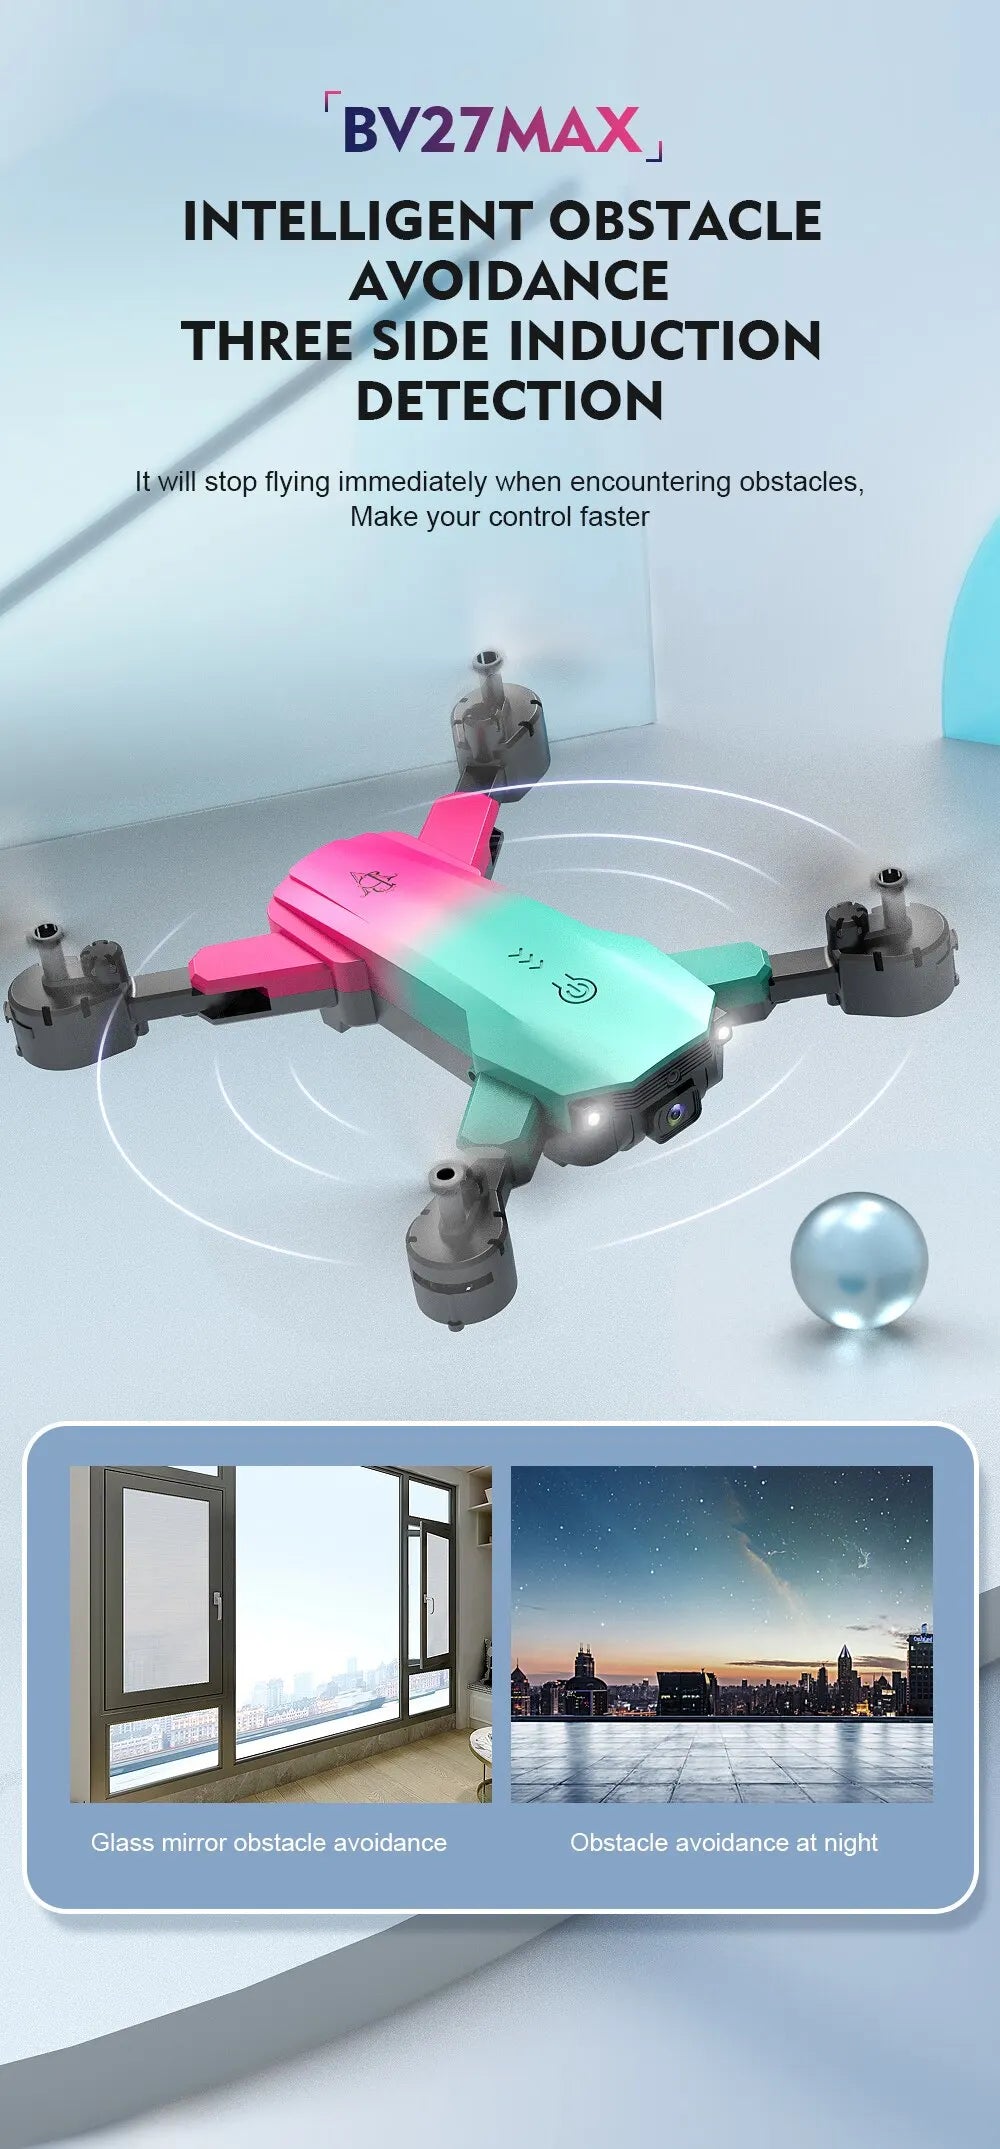 S29 Drone, BV2ZMAX INTELLIGENT OBSTACLE AVOIDANCE